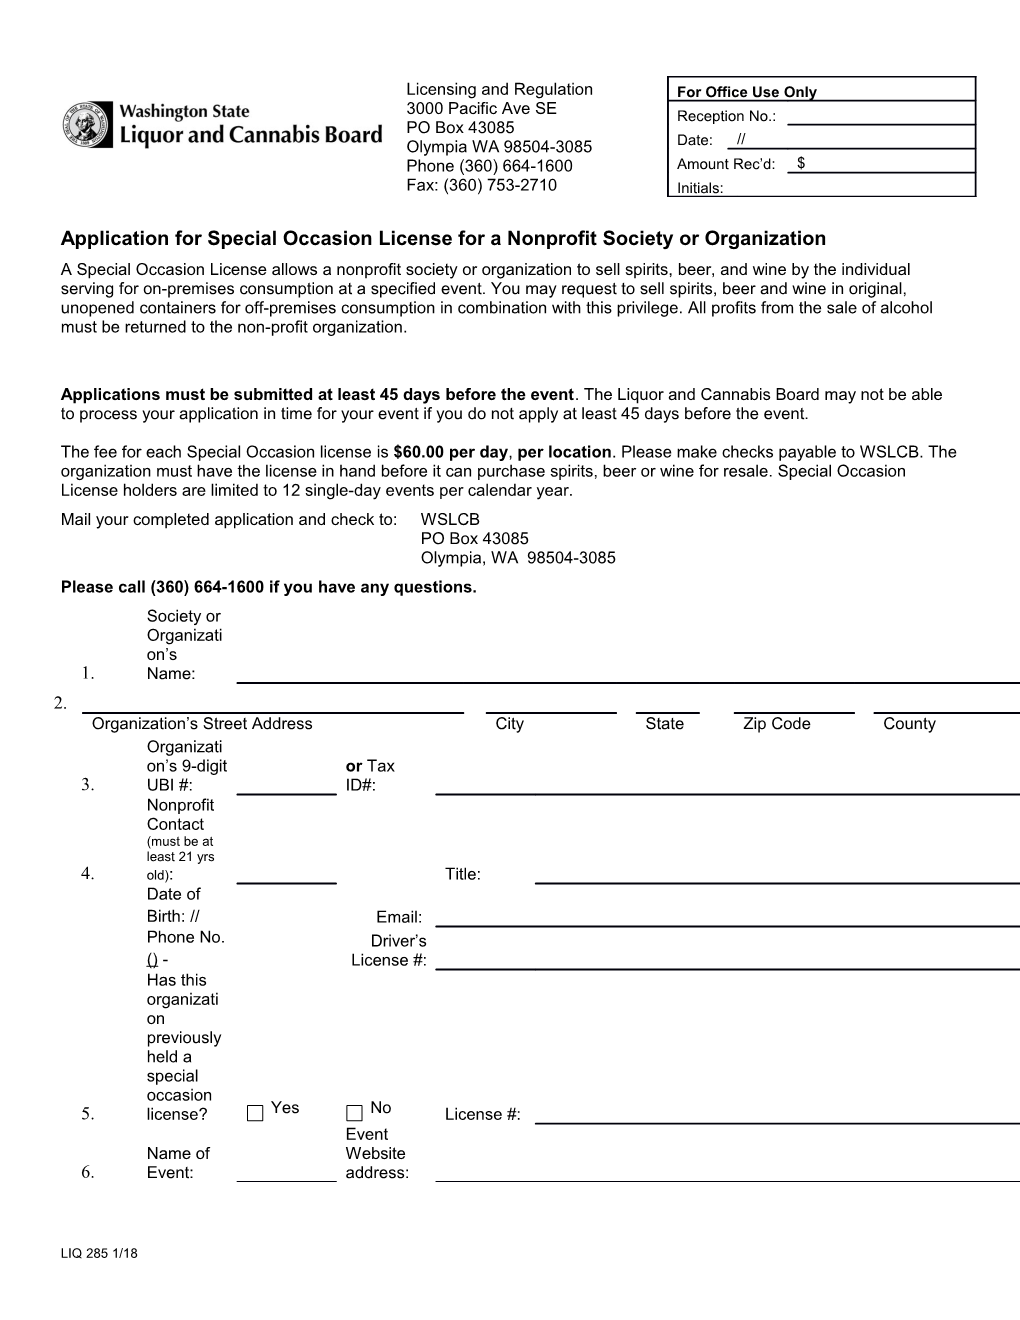 Application for Special Occasion License for a Nonprofit Society Or Organization